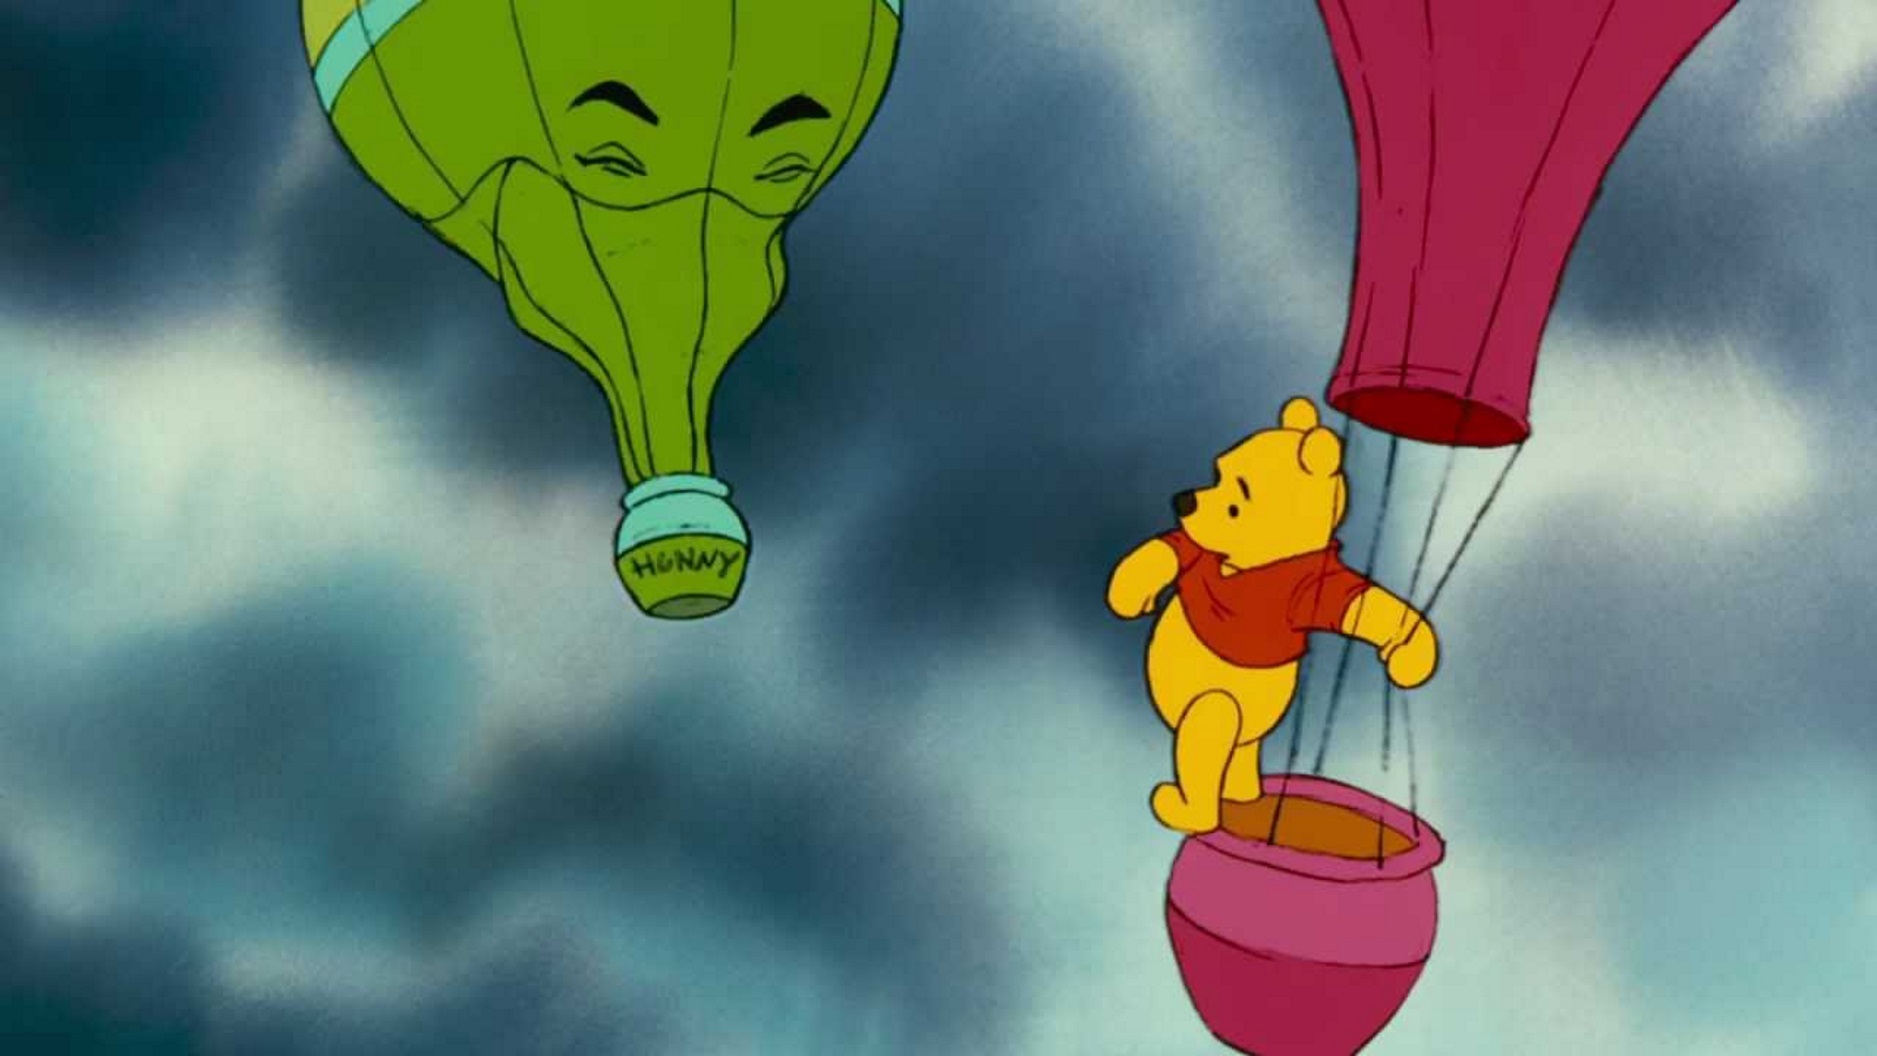 Heffalumps and Woozles turn into hot air balloons for pooh to jump from